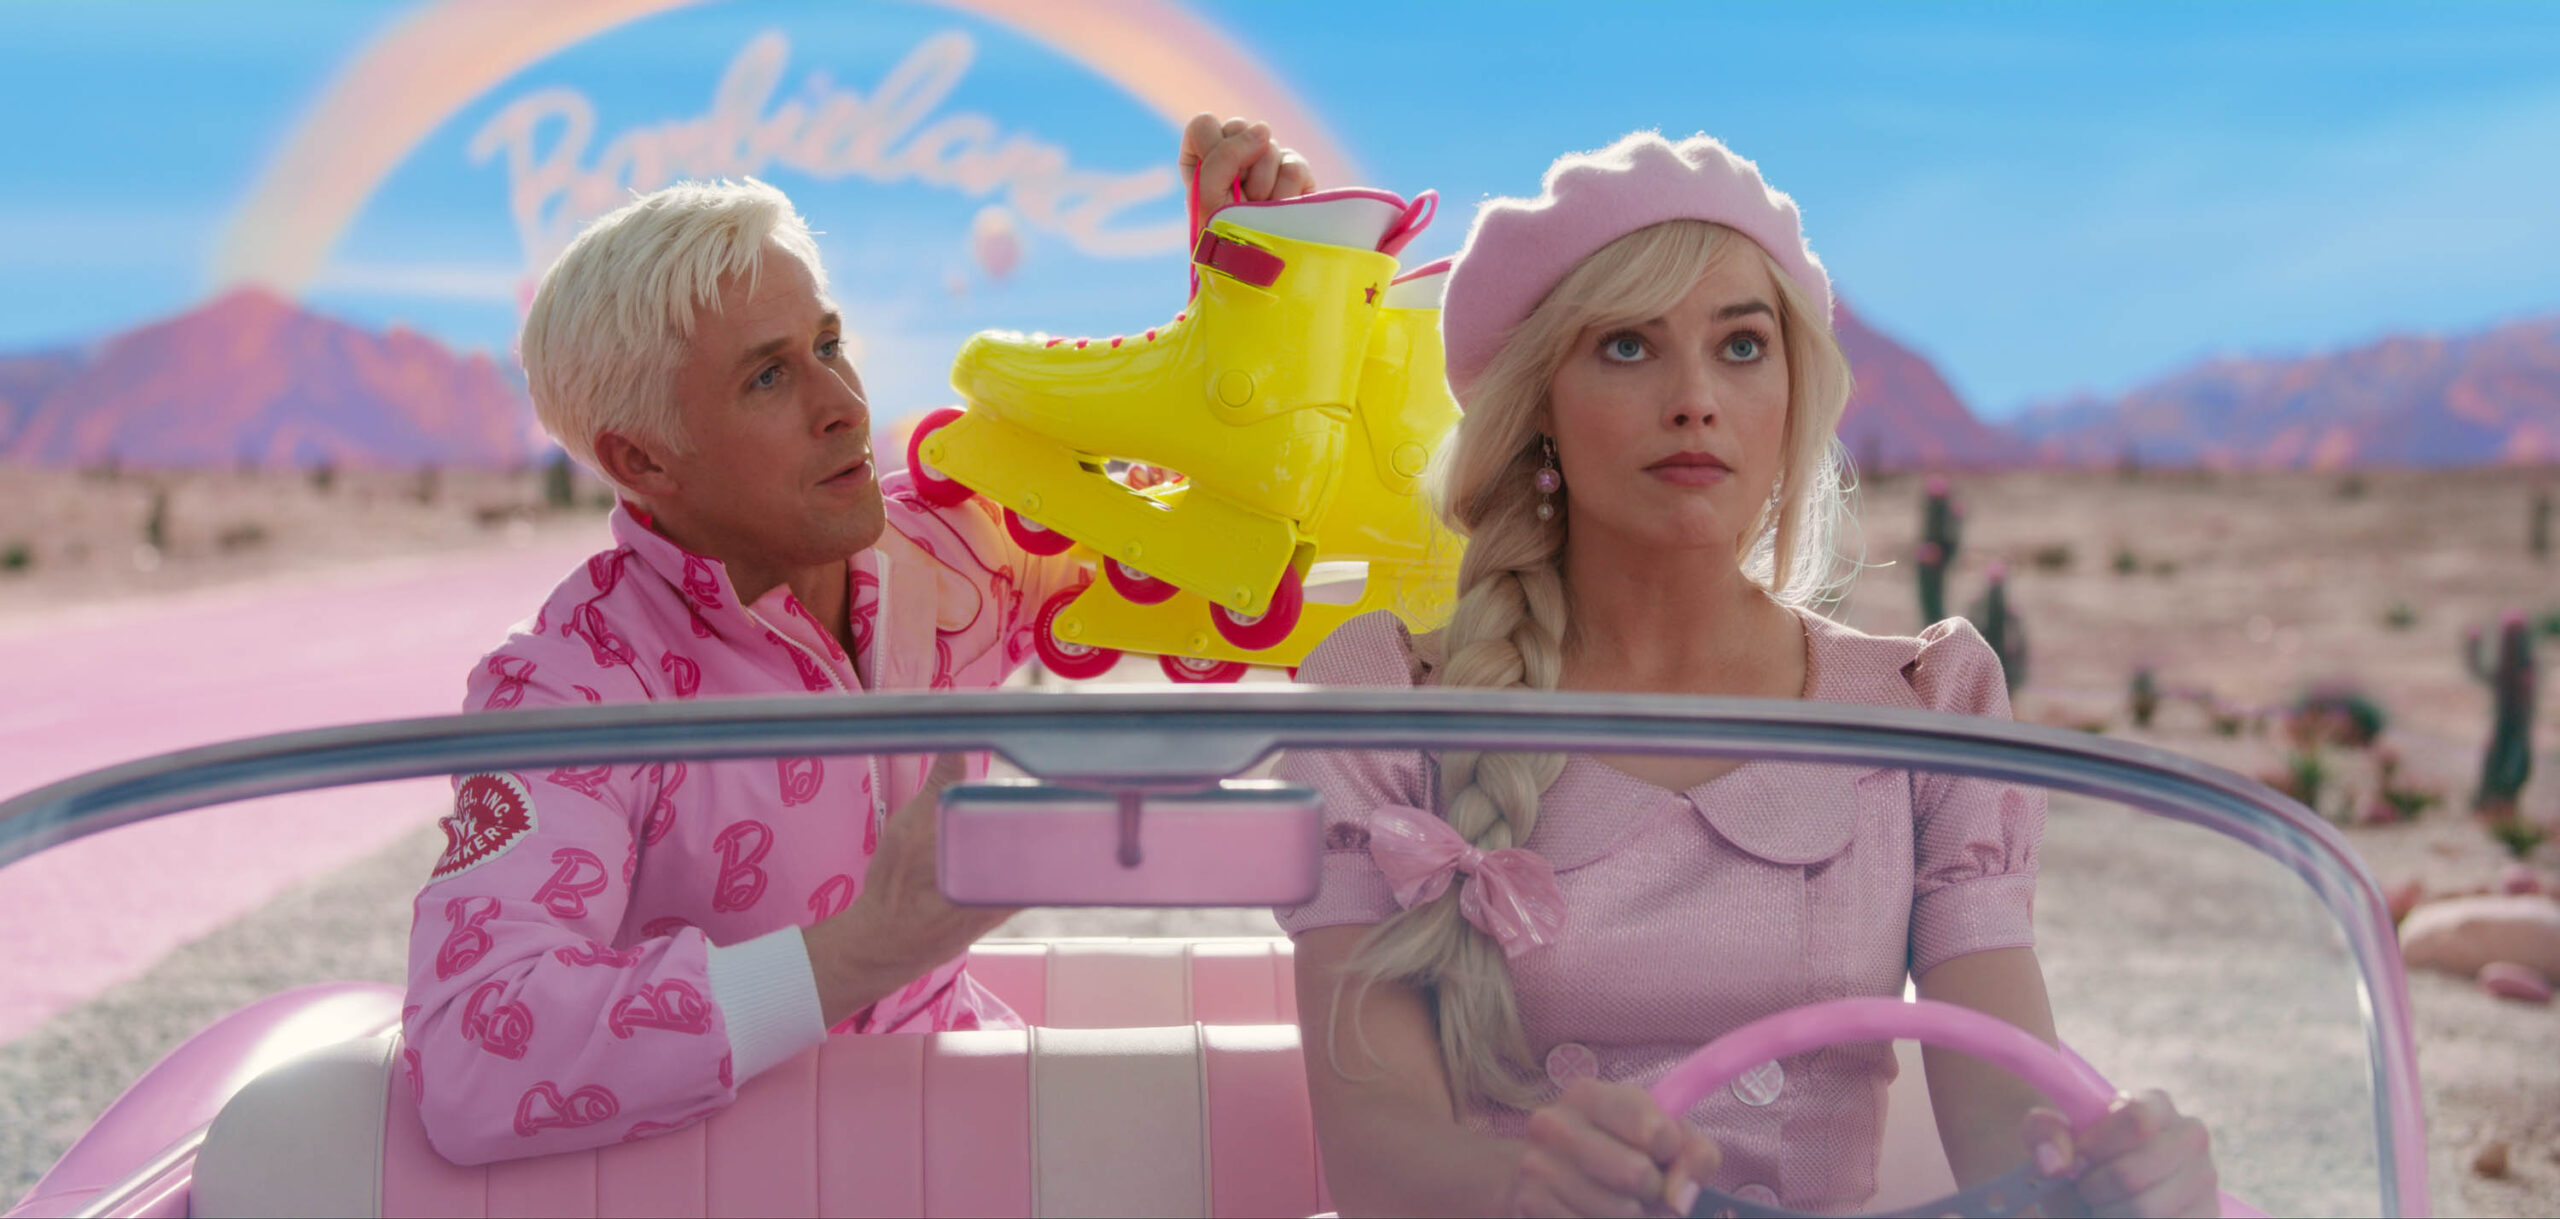 Ryan Gosling come Ken e Margot Robbie come Barbie in Barbie [credit: Copyright 2023 Warner Bros. Entertainment Inc. All Rights Reserved; courtesy Warner Bros. Pictures]